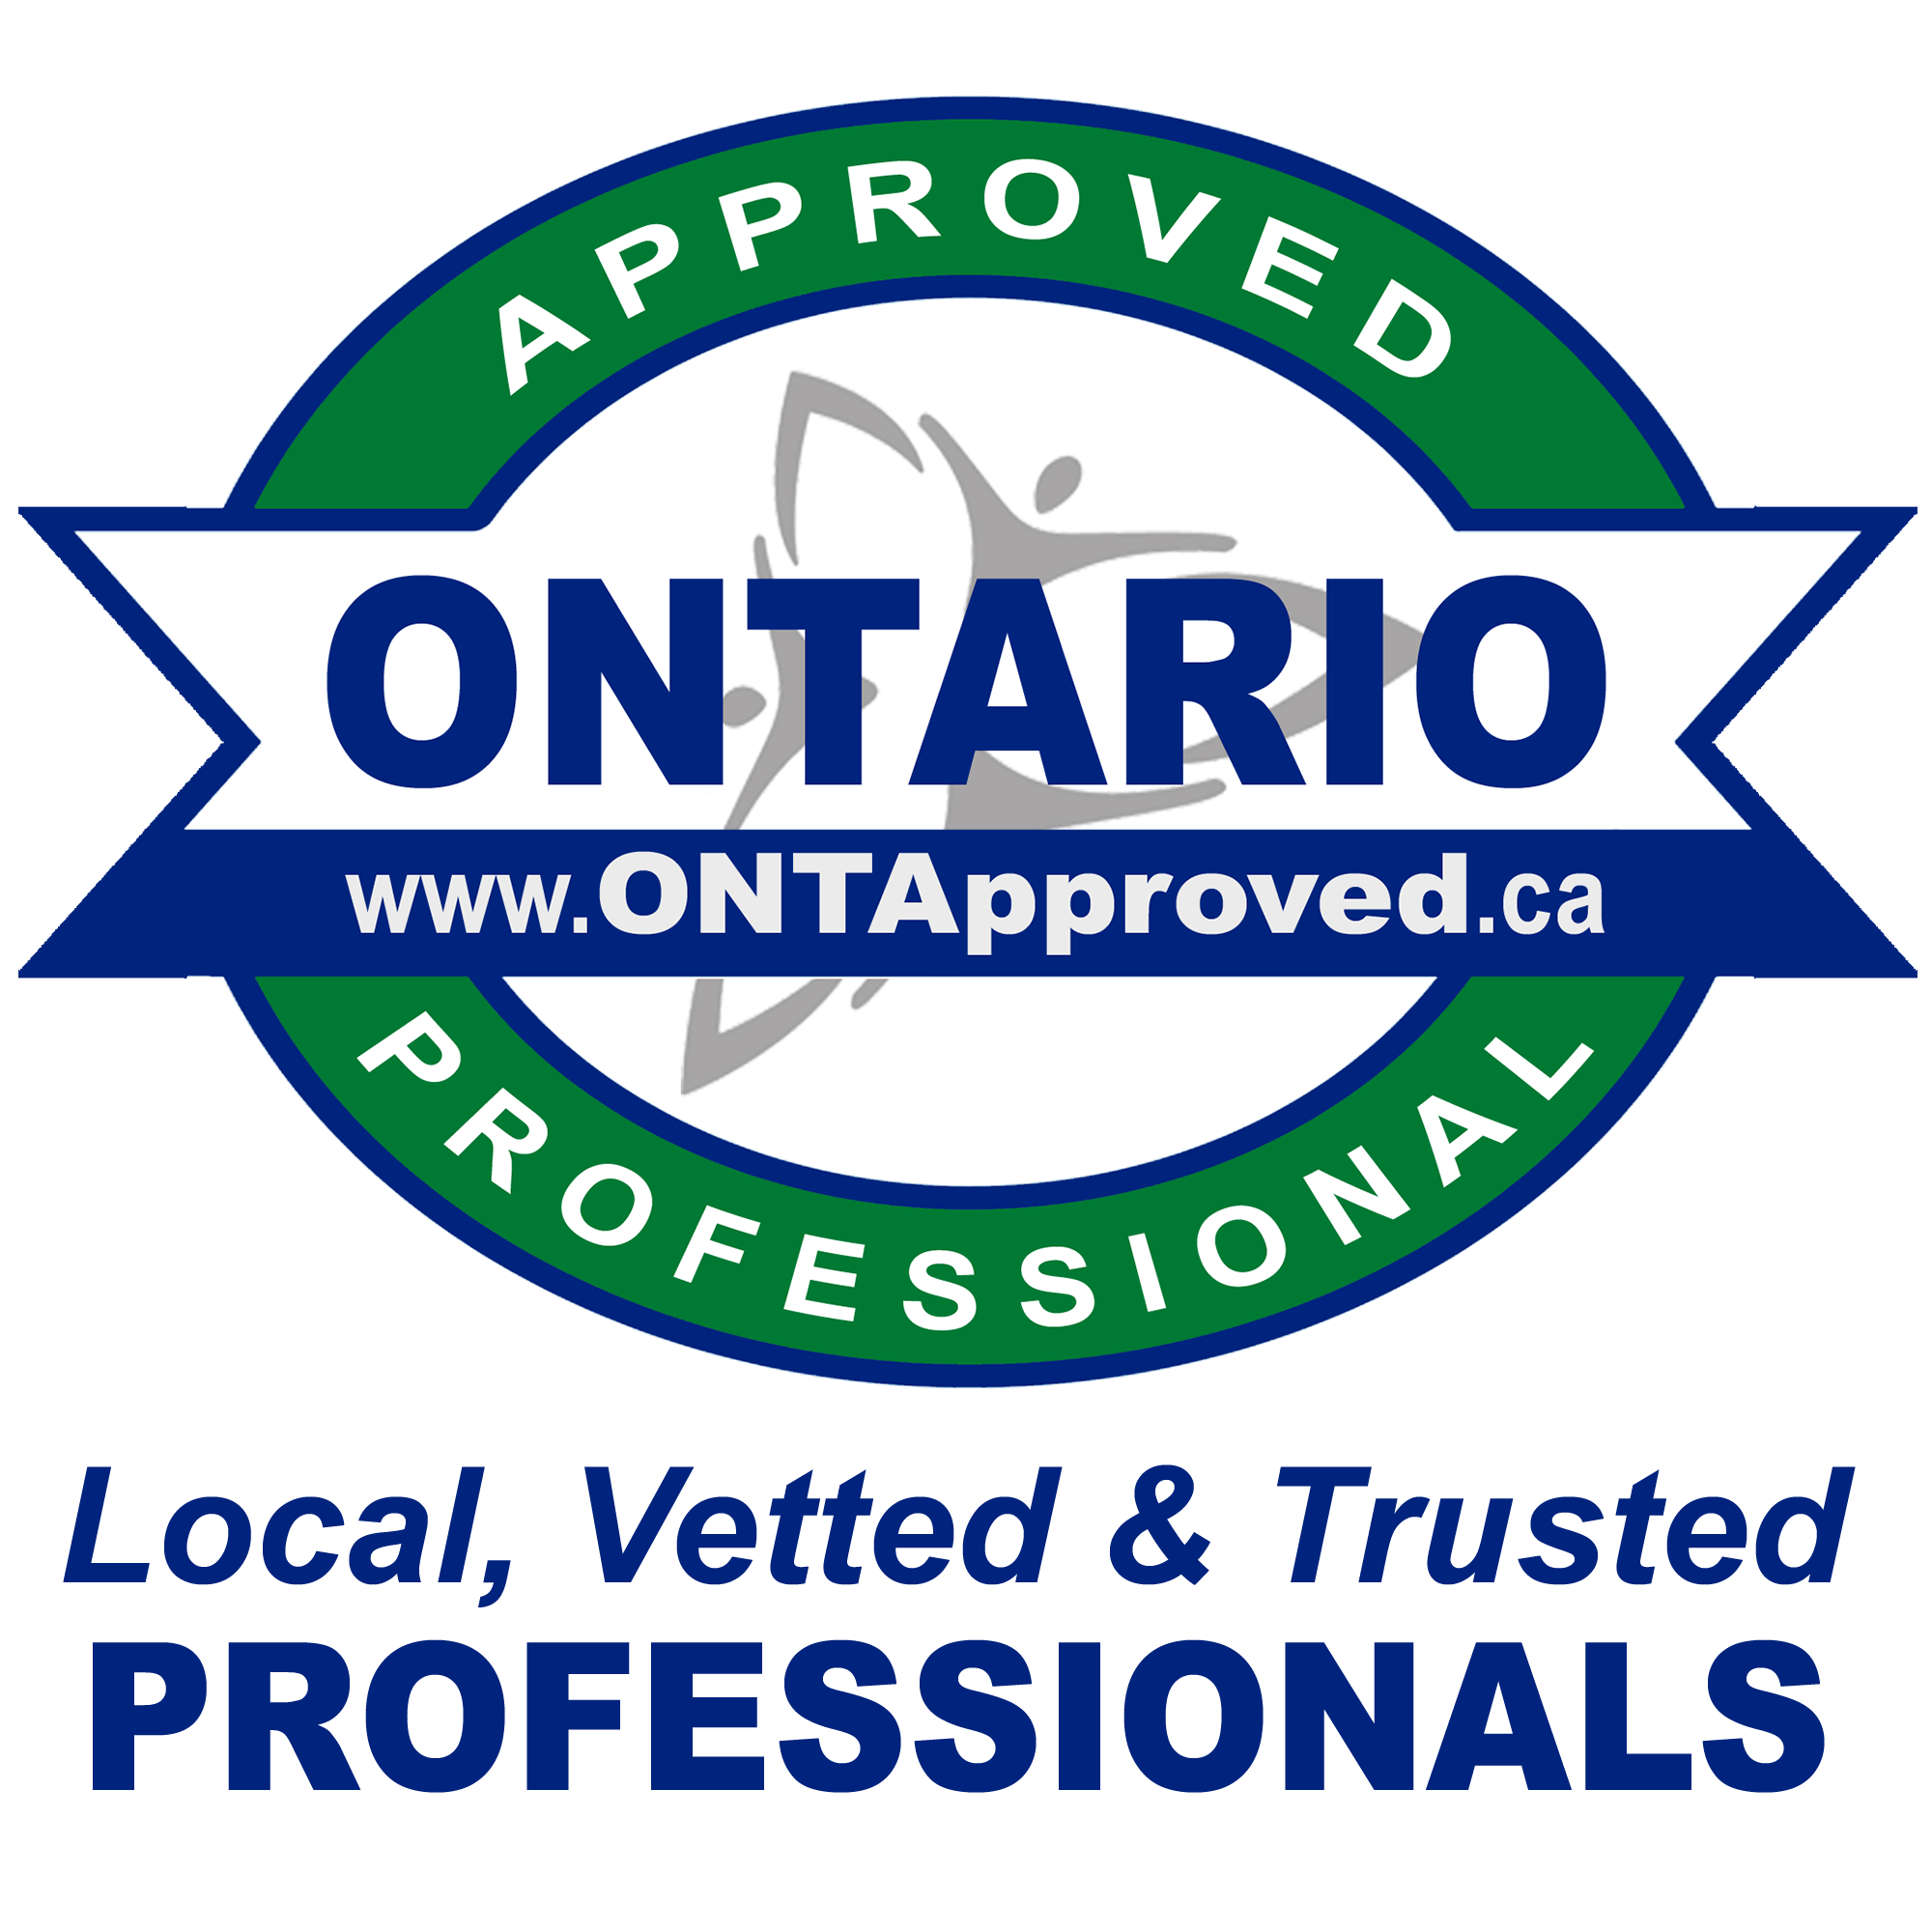 Ontario Approved Professionals